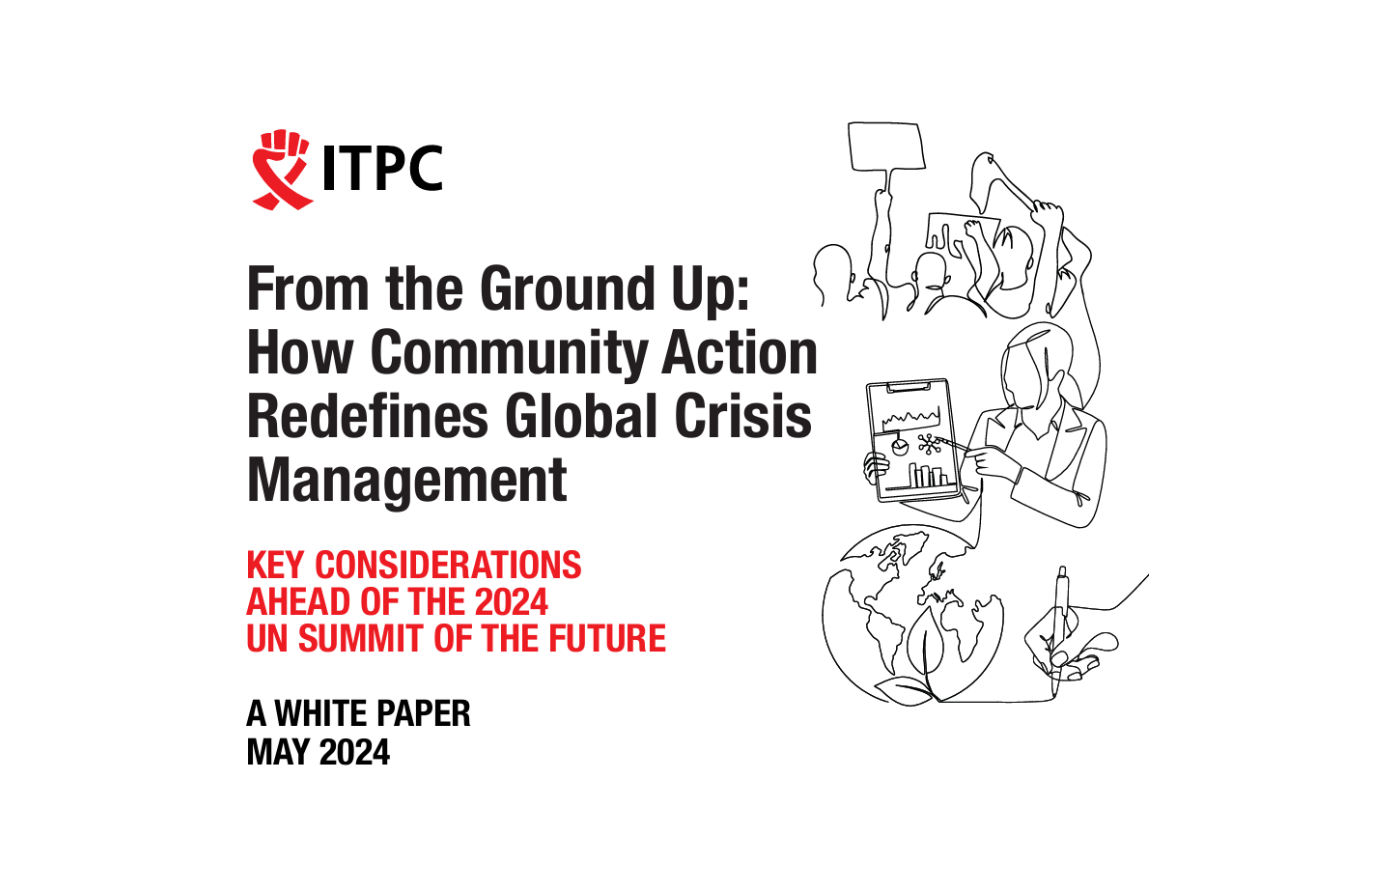 From the Ground Up: How Community Action Redefines Global Crisis Management